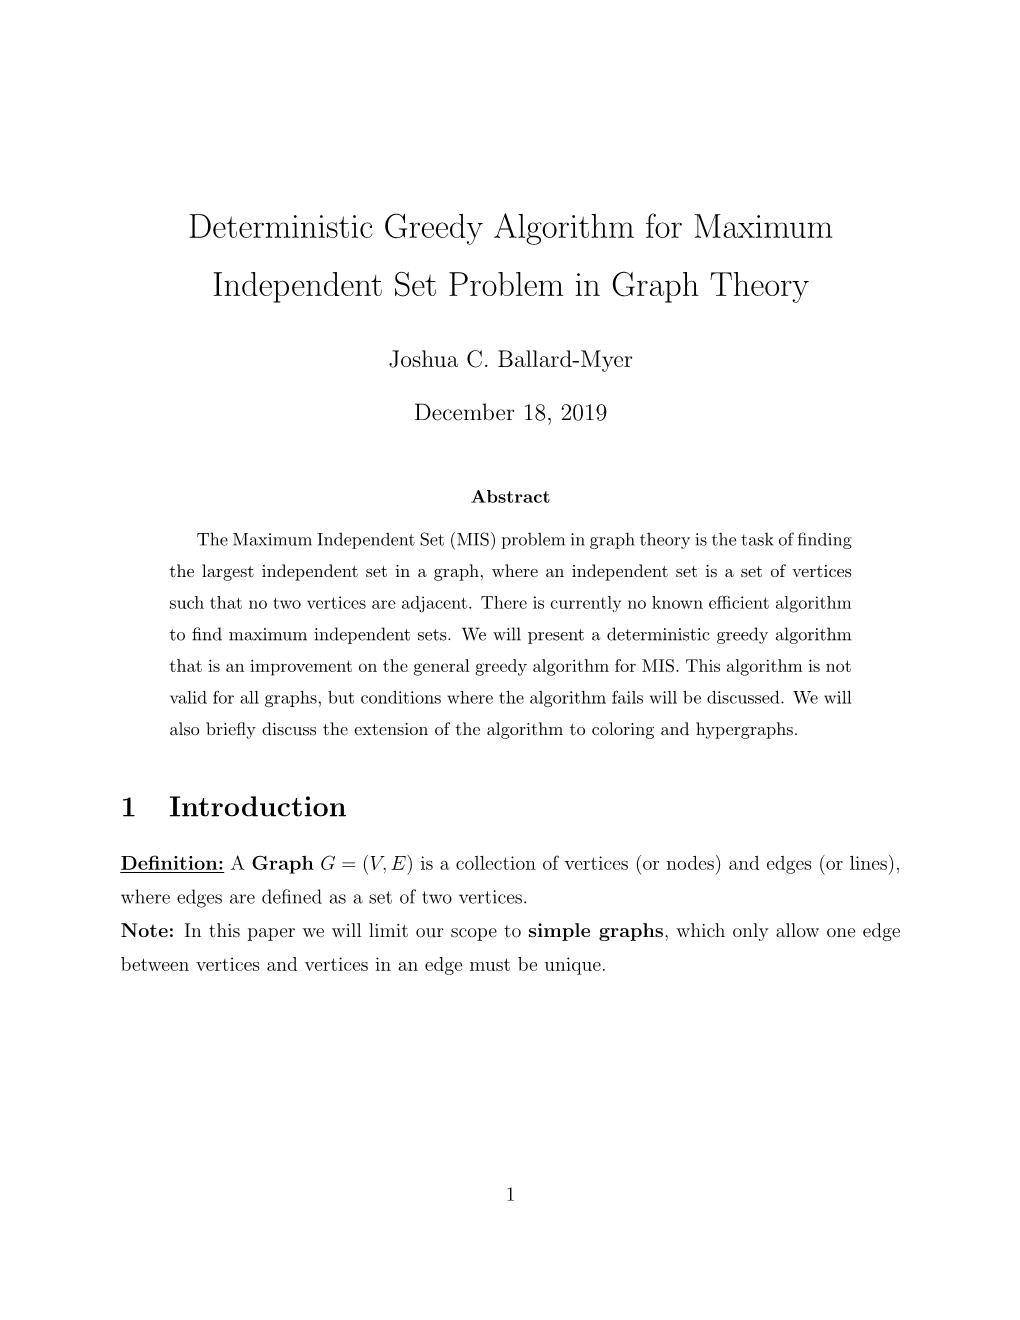 Deterministic Greedy Algorithm for Maximum Independent Set Problem in Graph Theory